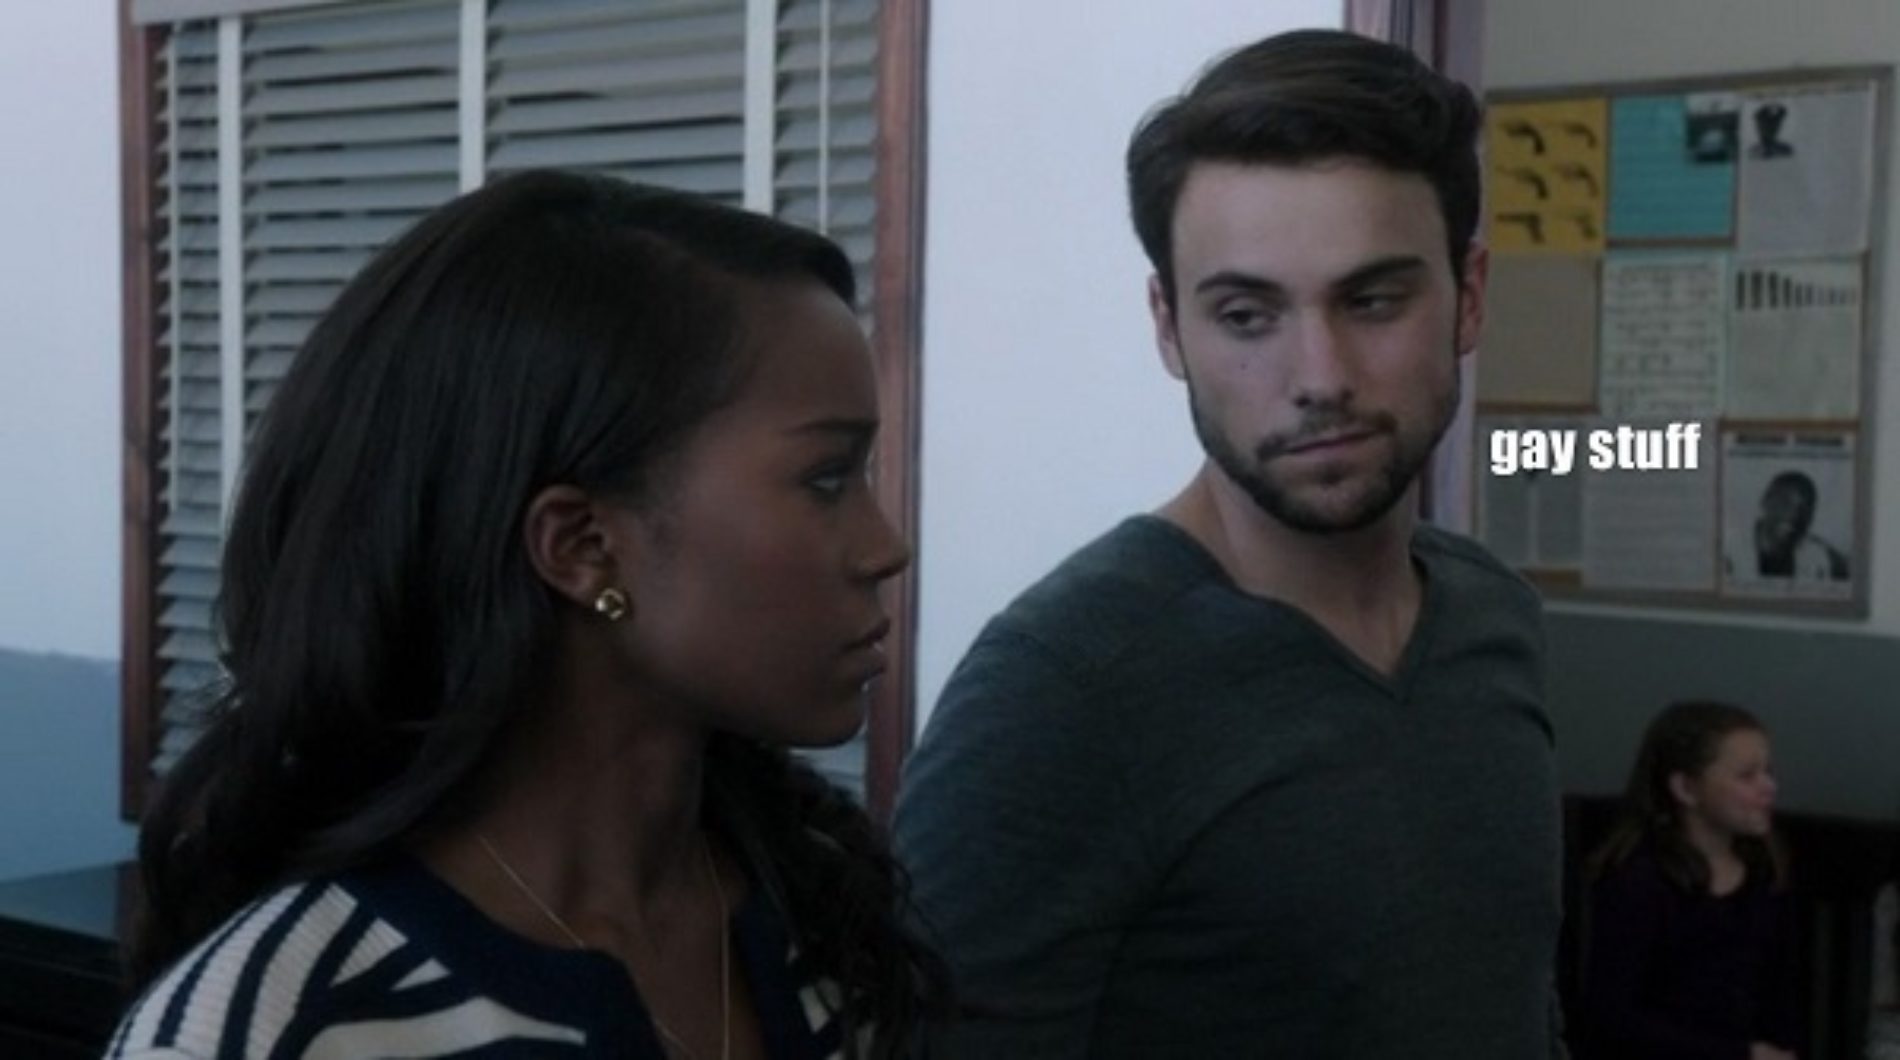 Wives And Husbands in ‘How To Get Away With Murder’